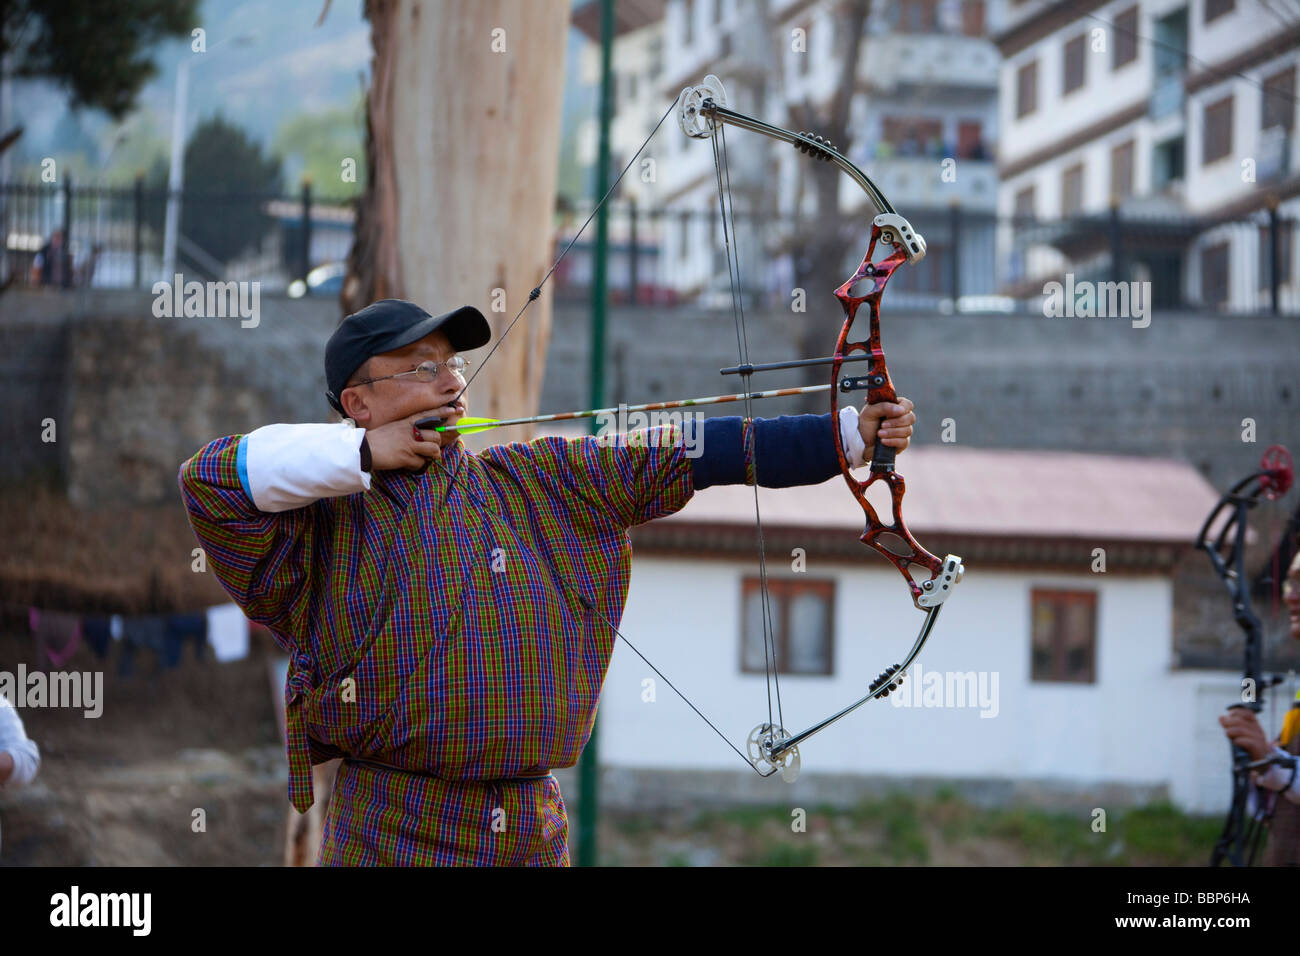 Archer competitor in costume Changlimithang National Sports Stadium, a multi-purpose stadium,Thimphu, Bhutan Horzontal View Stock Photo